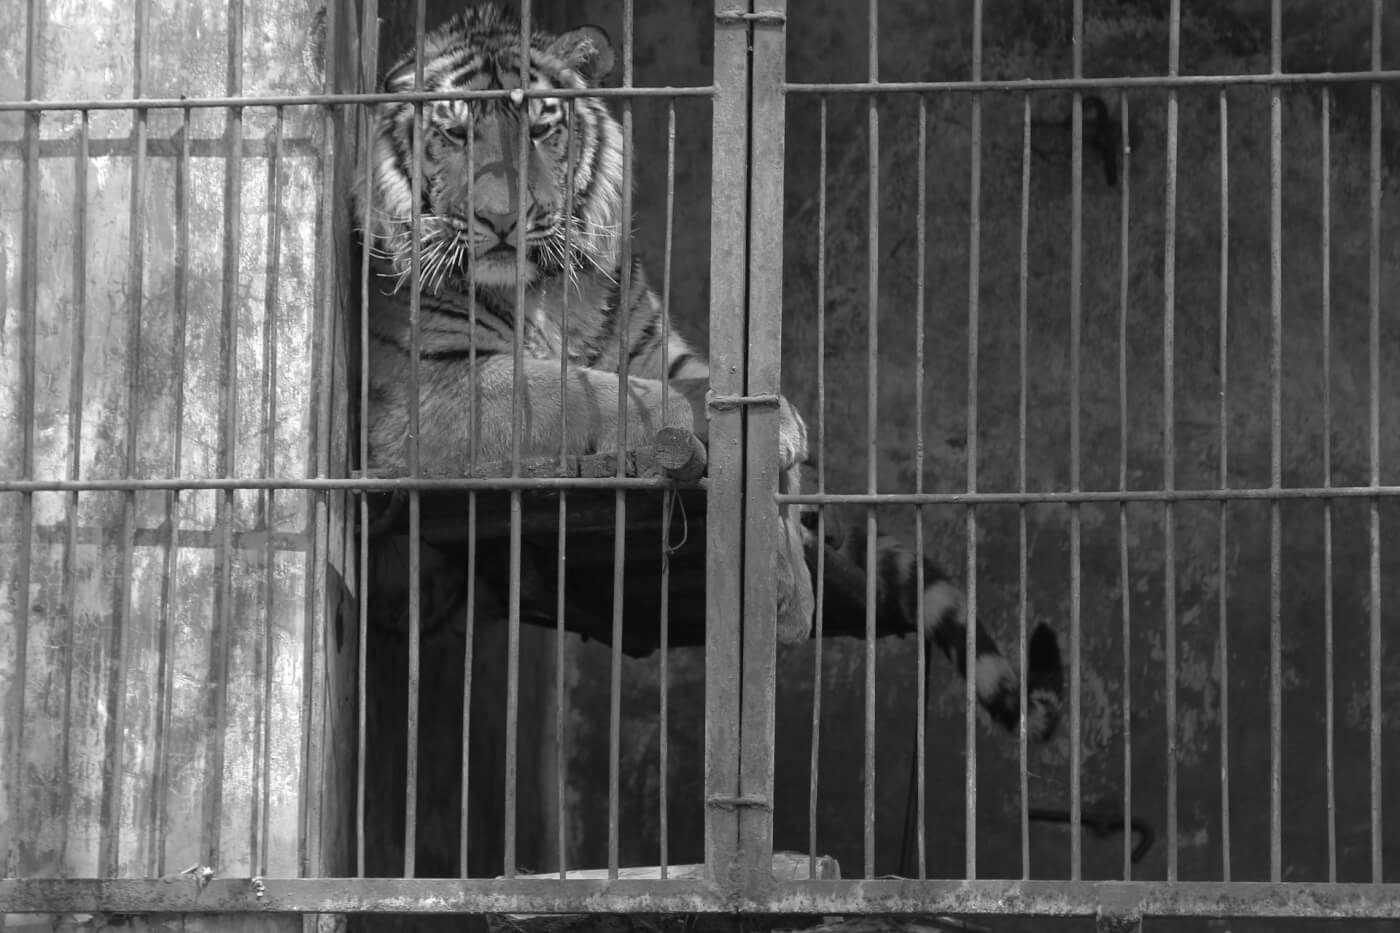 India's Zoos: A Grim Report | Animals Used for Entertainment - The Issues -  PETA India